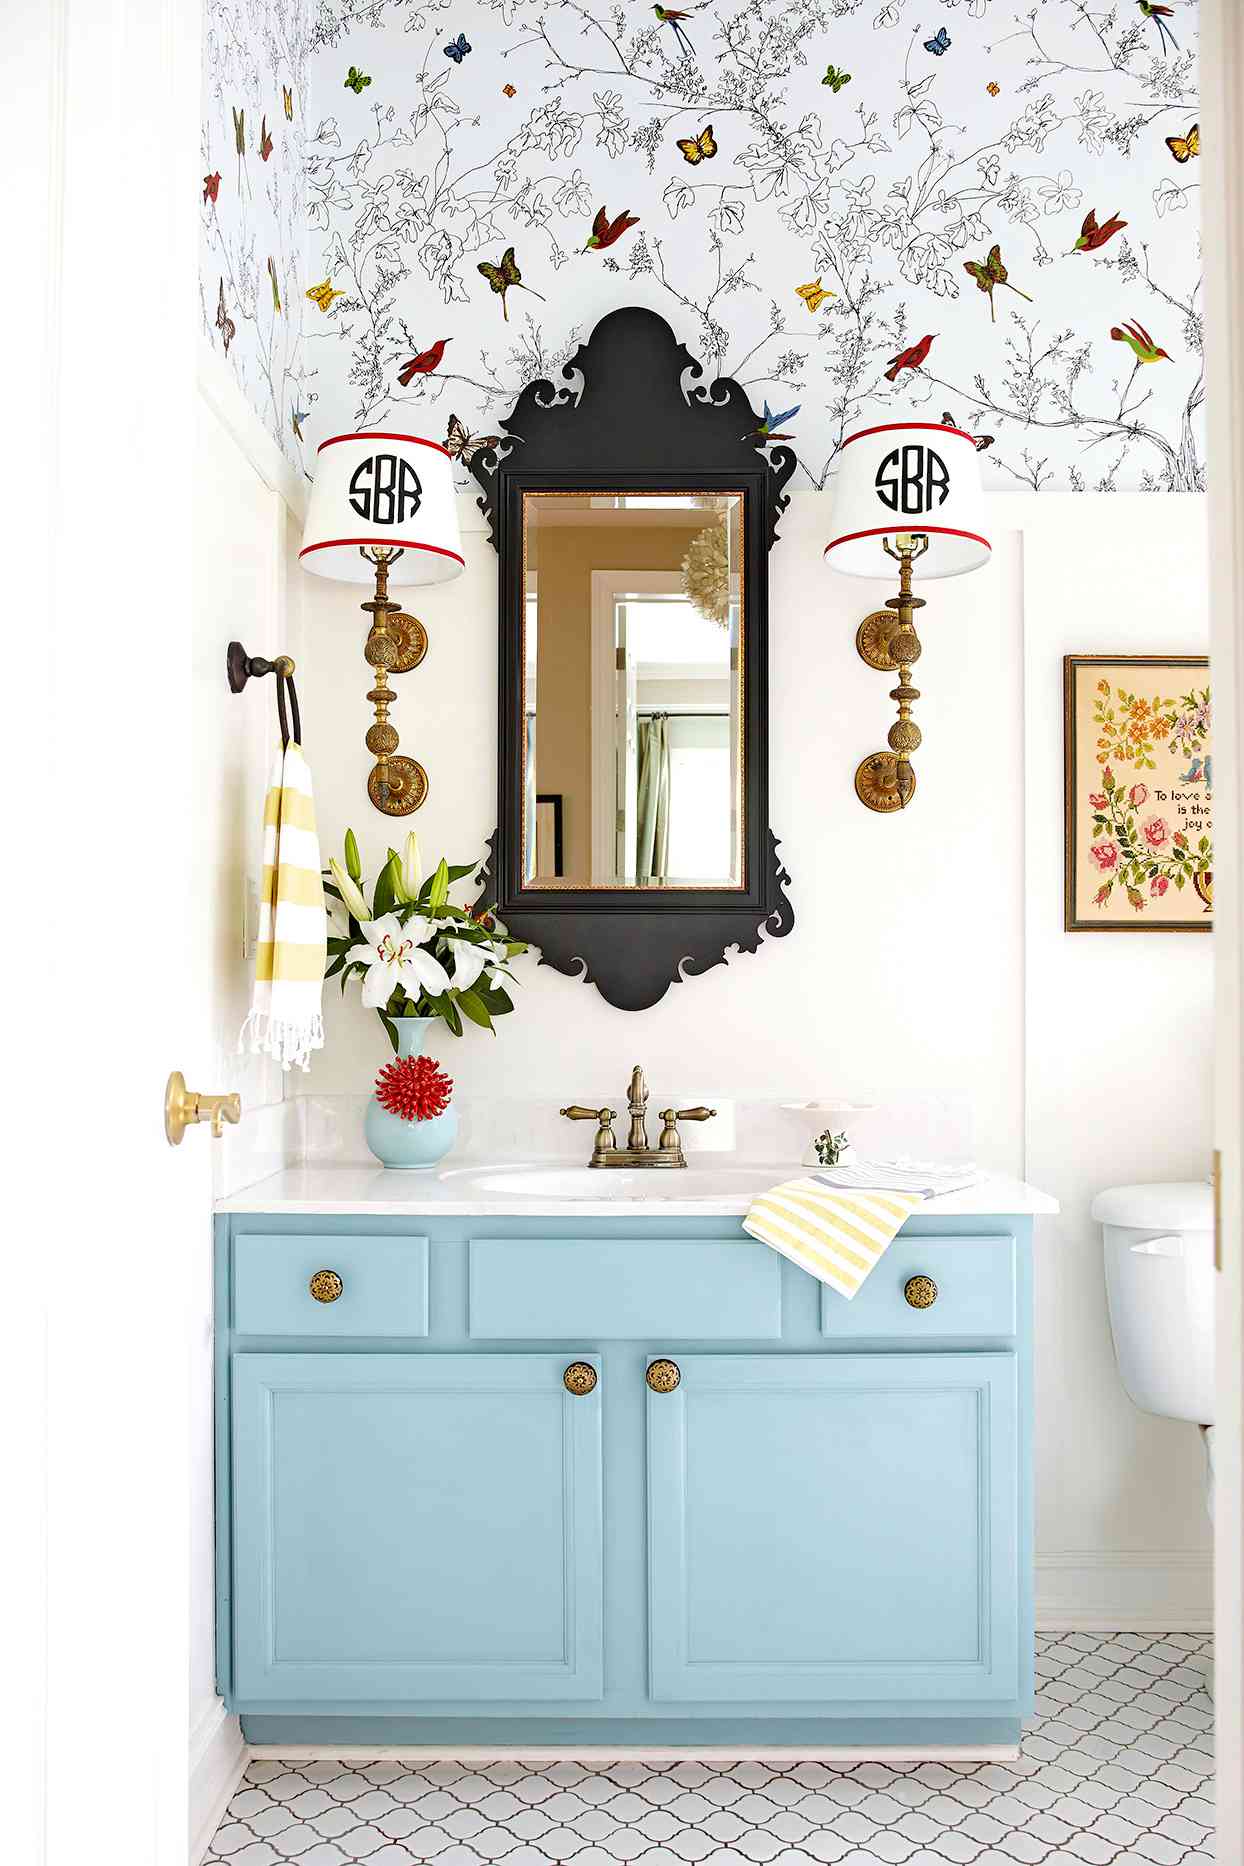 13 Before And After Vanity Makeovers, How To Replace A Built In Bathroom Vanity